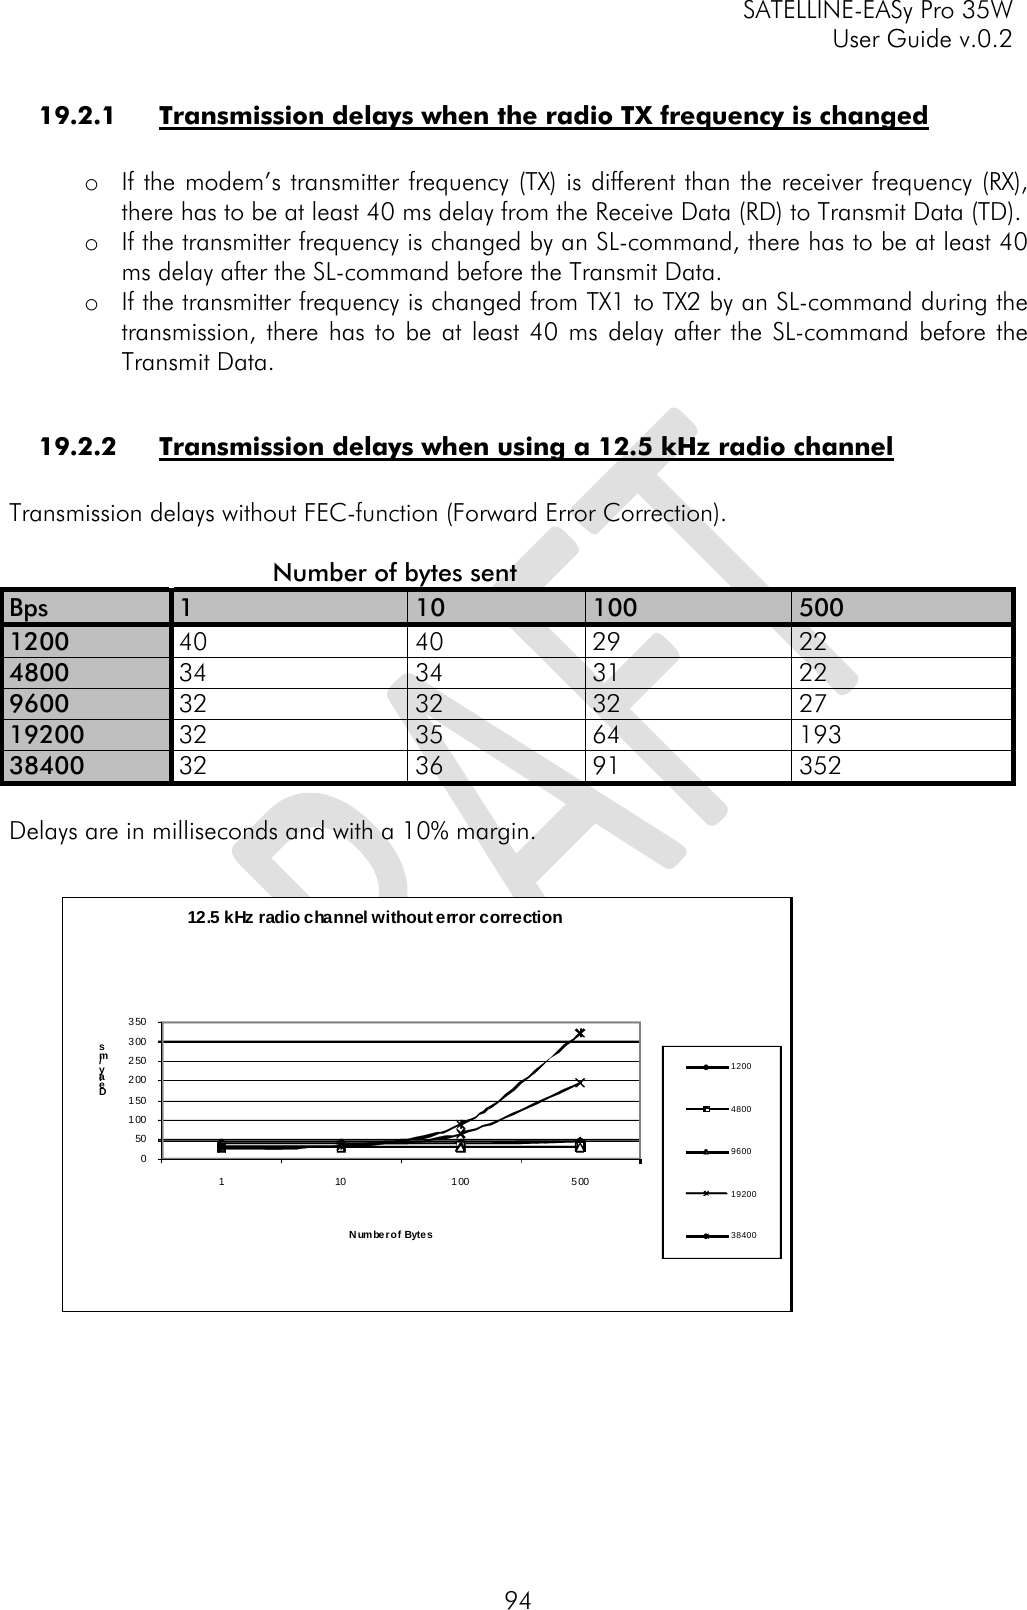     SATELLINE-EASy Pro 35W   User Guide v.0.2  94 19.2.1 Transmission delays when the radio TX frequency is changed  o If the modem’s transmitter frequency (TX) is different than the receiver frequency (RX), there has to be at least 40 ms delay from the Receive Data (RD) to Transmit Data (TD). o If the transmitter frequency is changed by an SL-command, there has to be at least 40 ms delay after the SL-command before the Transmit Data. o If the transmitter frequency is changed from TX1 to TX2 by an SL-command during the transmission, there has to be at least 40 ms delay after the SL-command before the Transmit Data.   19.2.2 Transmission delays when using a 12.5 kHz radio channel  Transmission delays without FEC-function (Forward Error Correction).                             Number of bytes sent Bps  1  10 100 500 1200  40 40 29 22 4800  34 34 31 22 9600  32 32 32 27 19200  32 35 64 193 38400  32 36 91 352  Delays are in milliseconds and with a 10% margin.     050100150200250300350110100500Delay / msNumber of  Bytes12.5 kHz radio channel without error correction1200480096001920038400